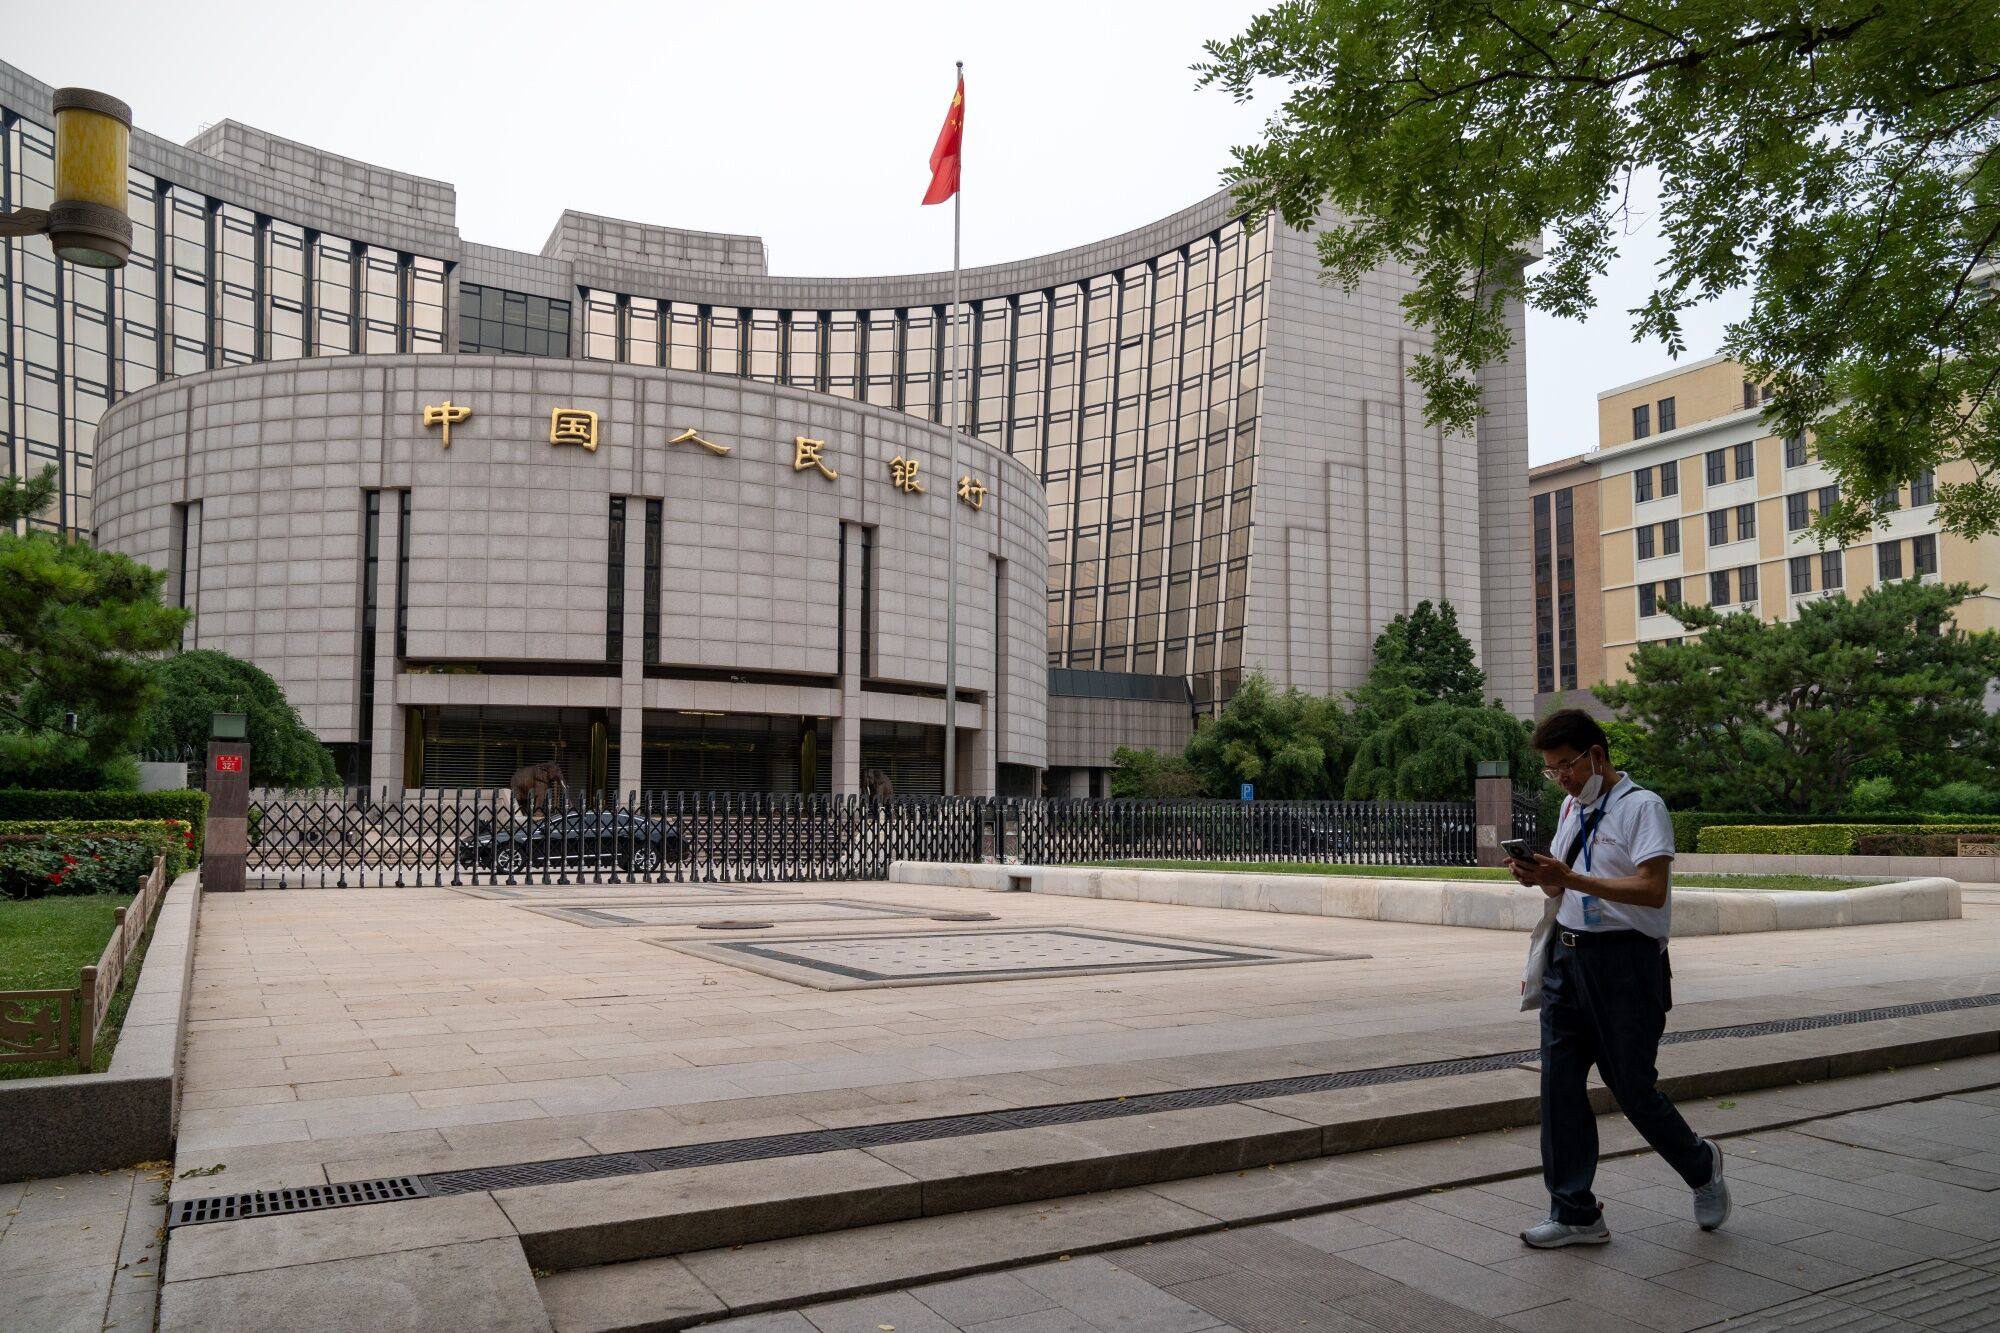 The People’s Bank of China (PBOC) building in Beijing, China. Photo: Bloomberg